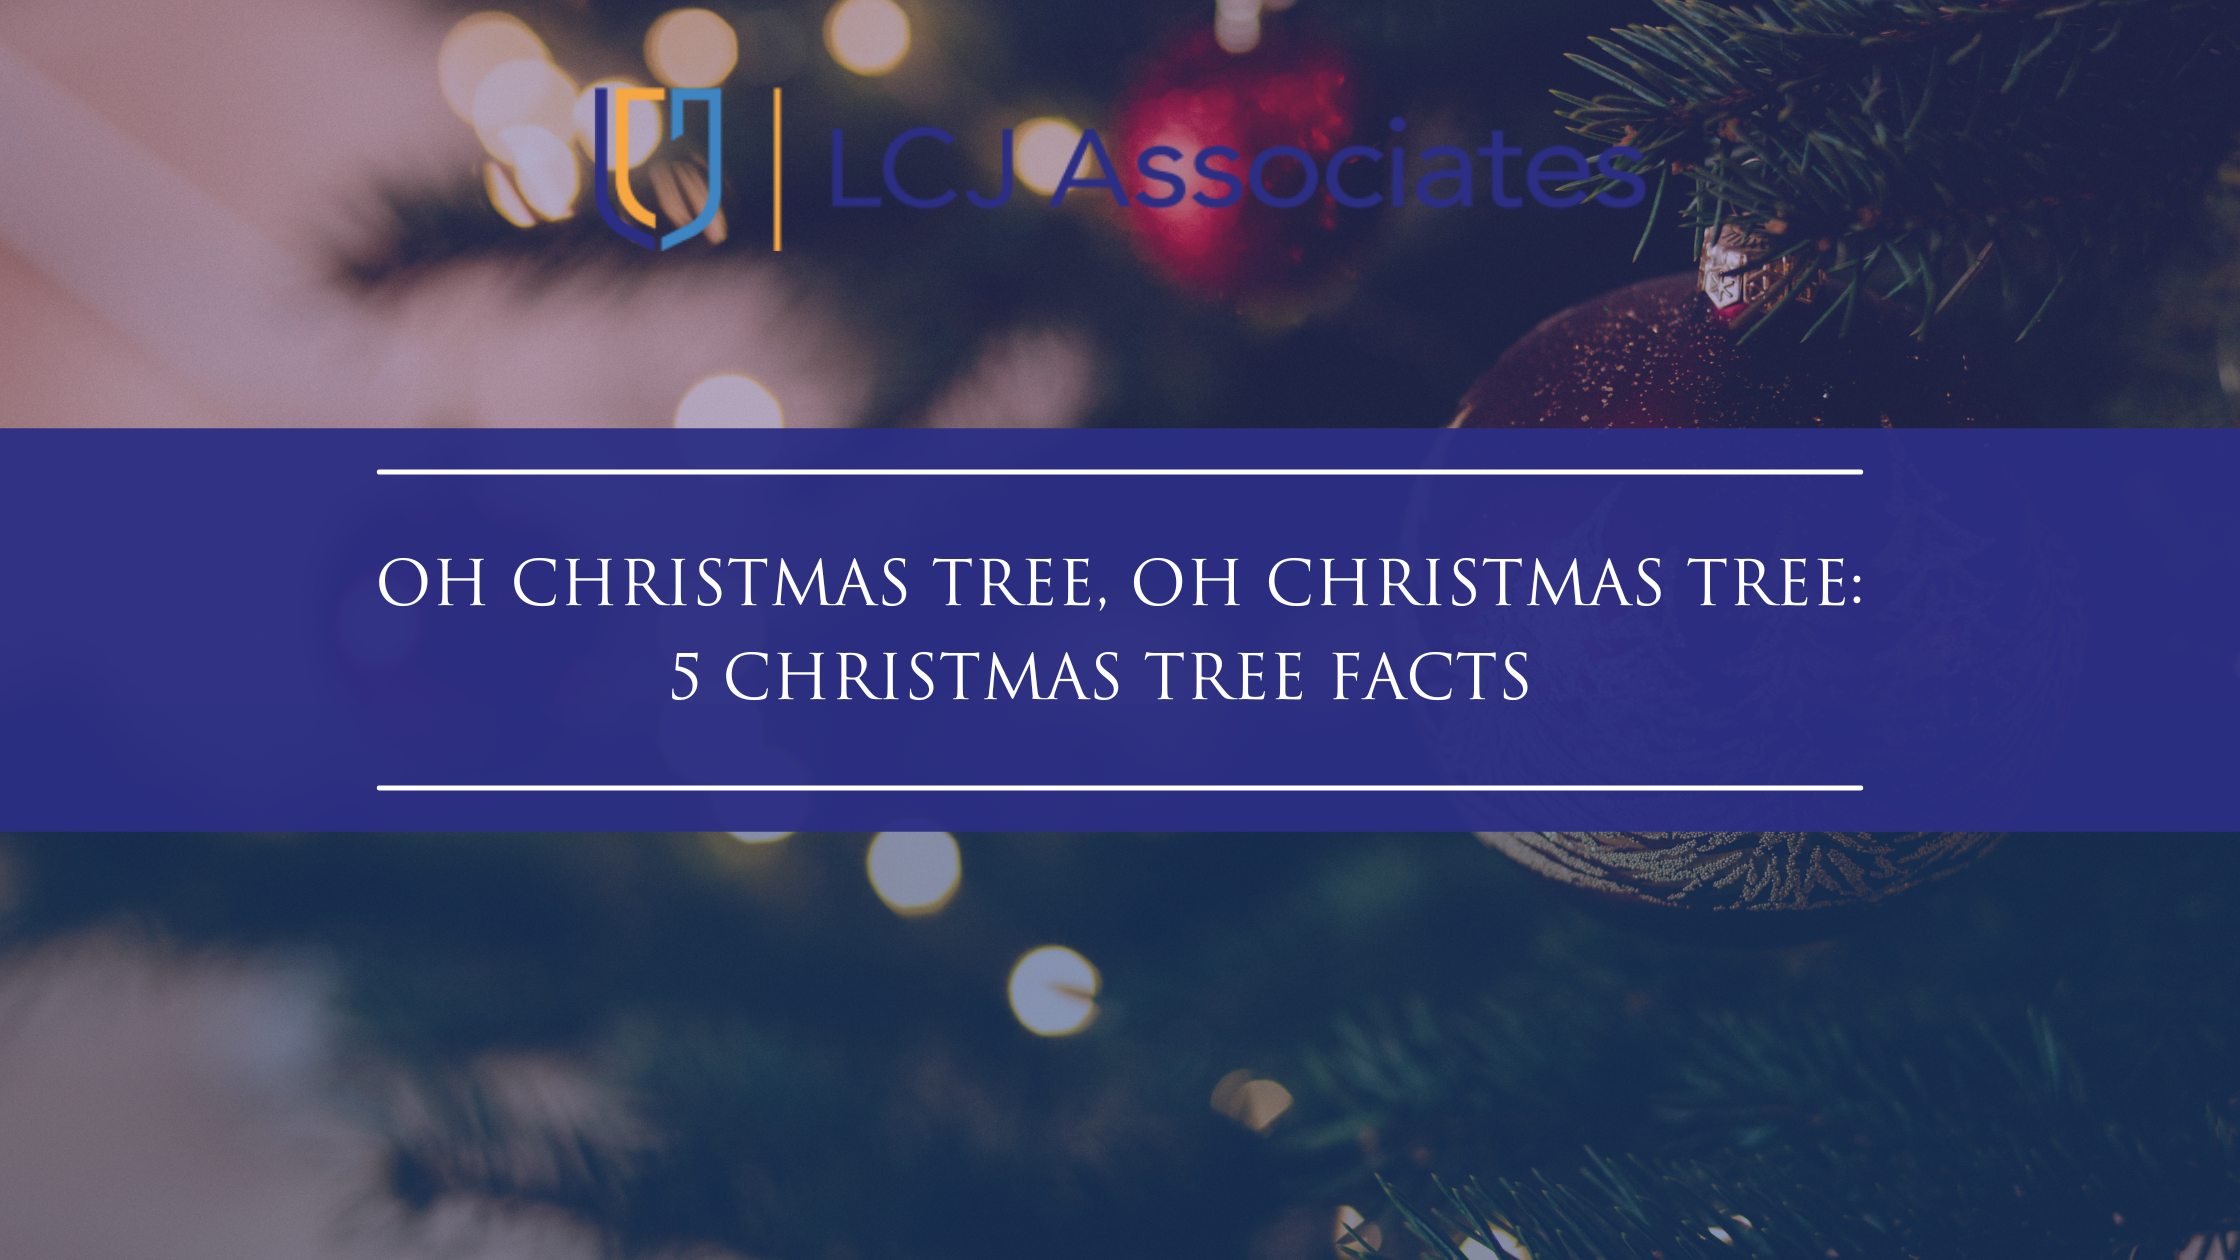 Oh Christmas Tree, Oh Christmas Tree: 5 Christmas Tree Facts